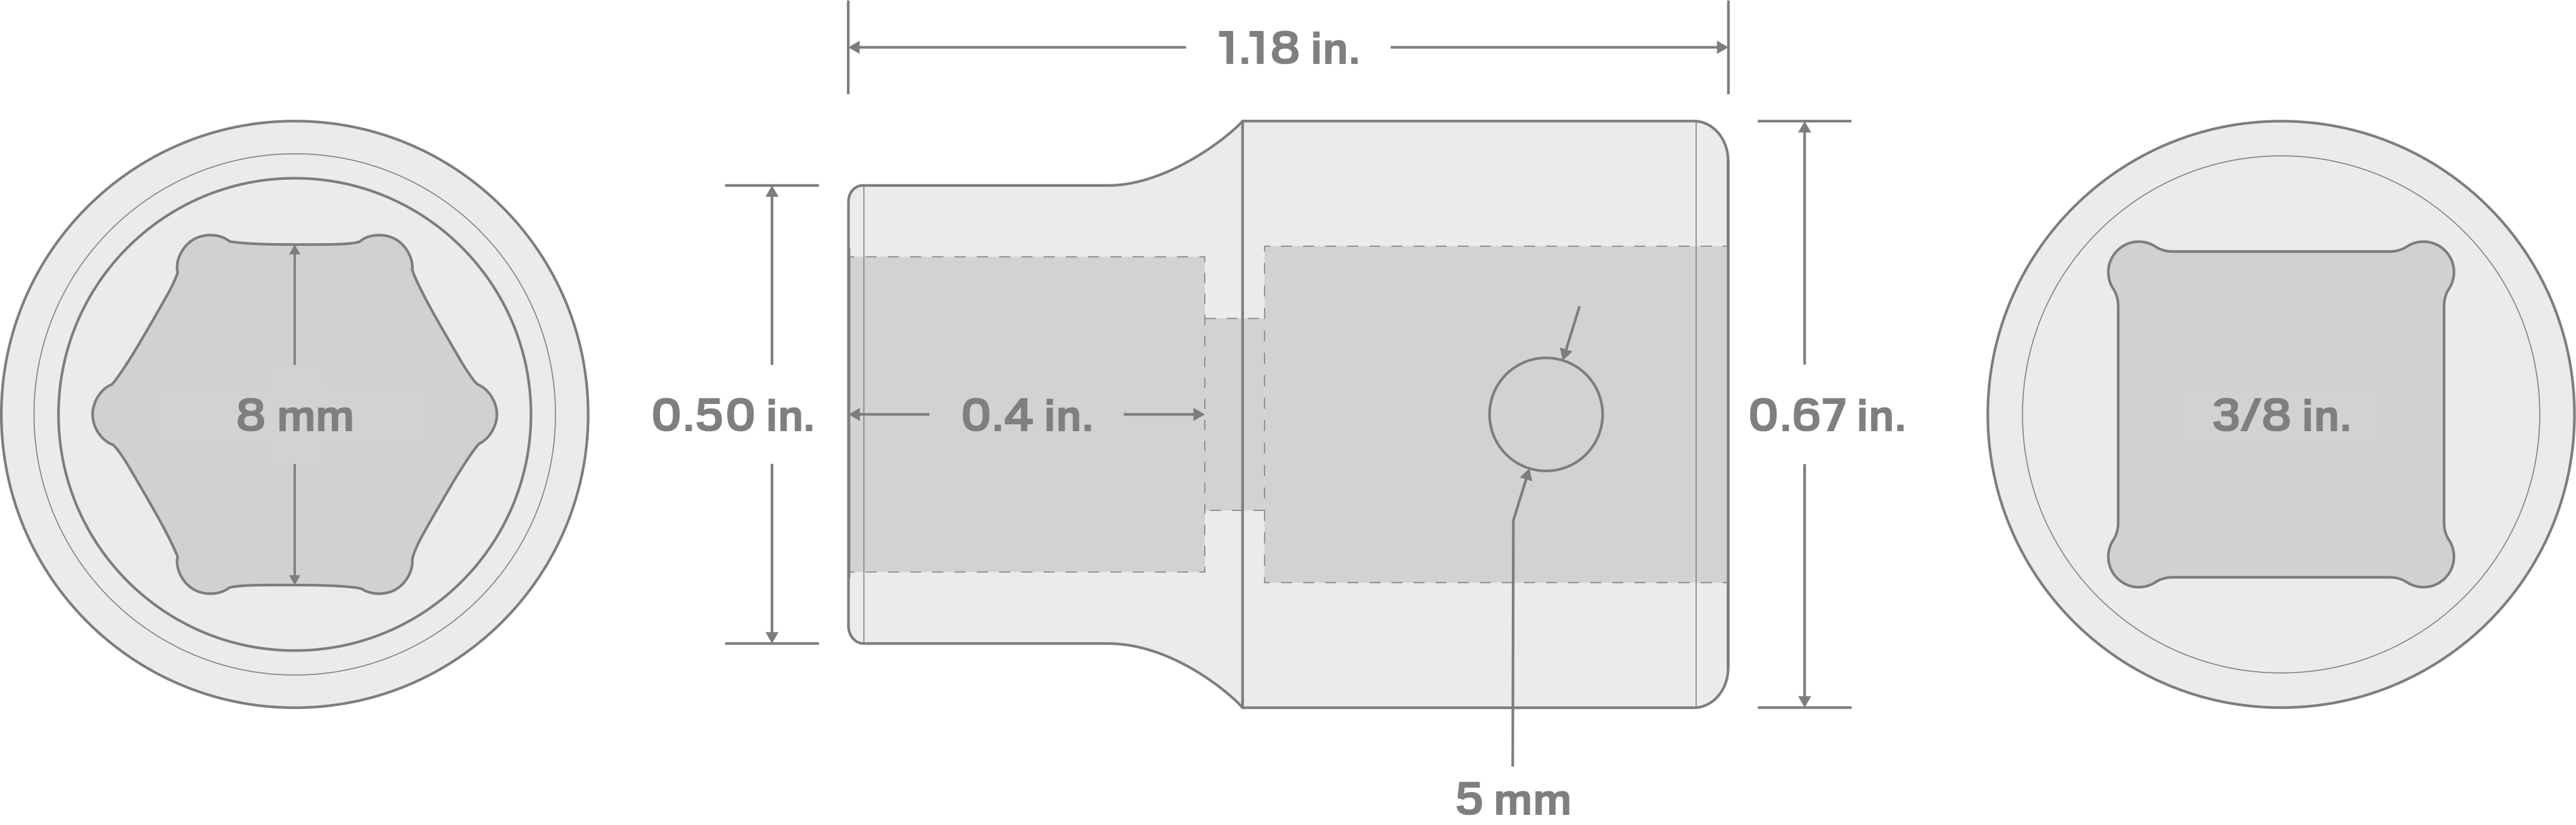 Specs for 3/8 Inch Drive x 8 mm 6-Point Impact Socket